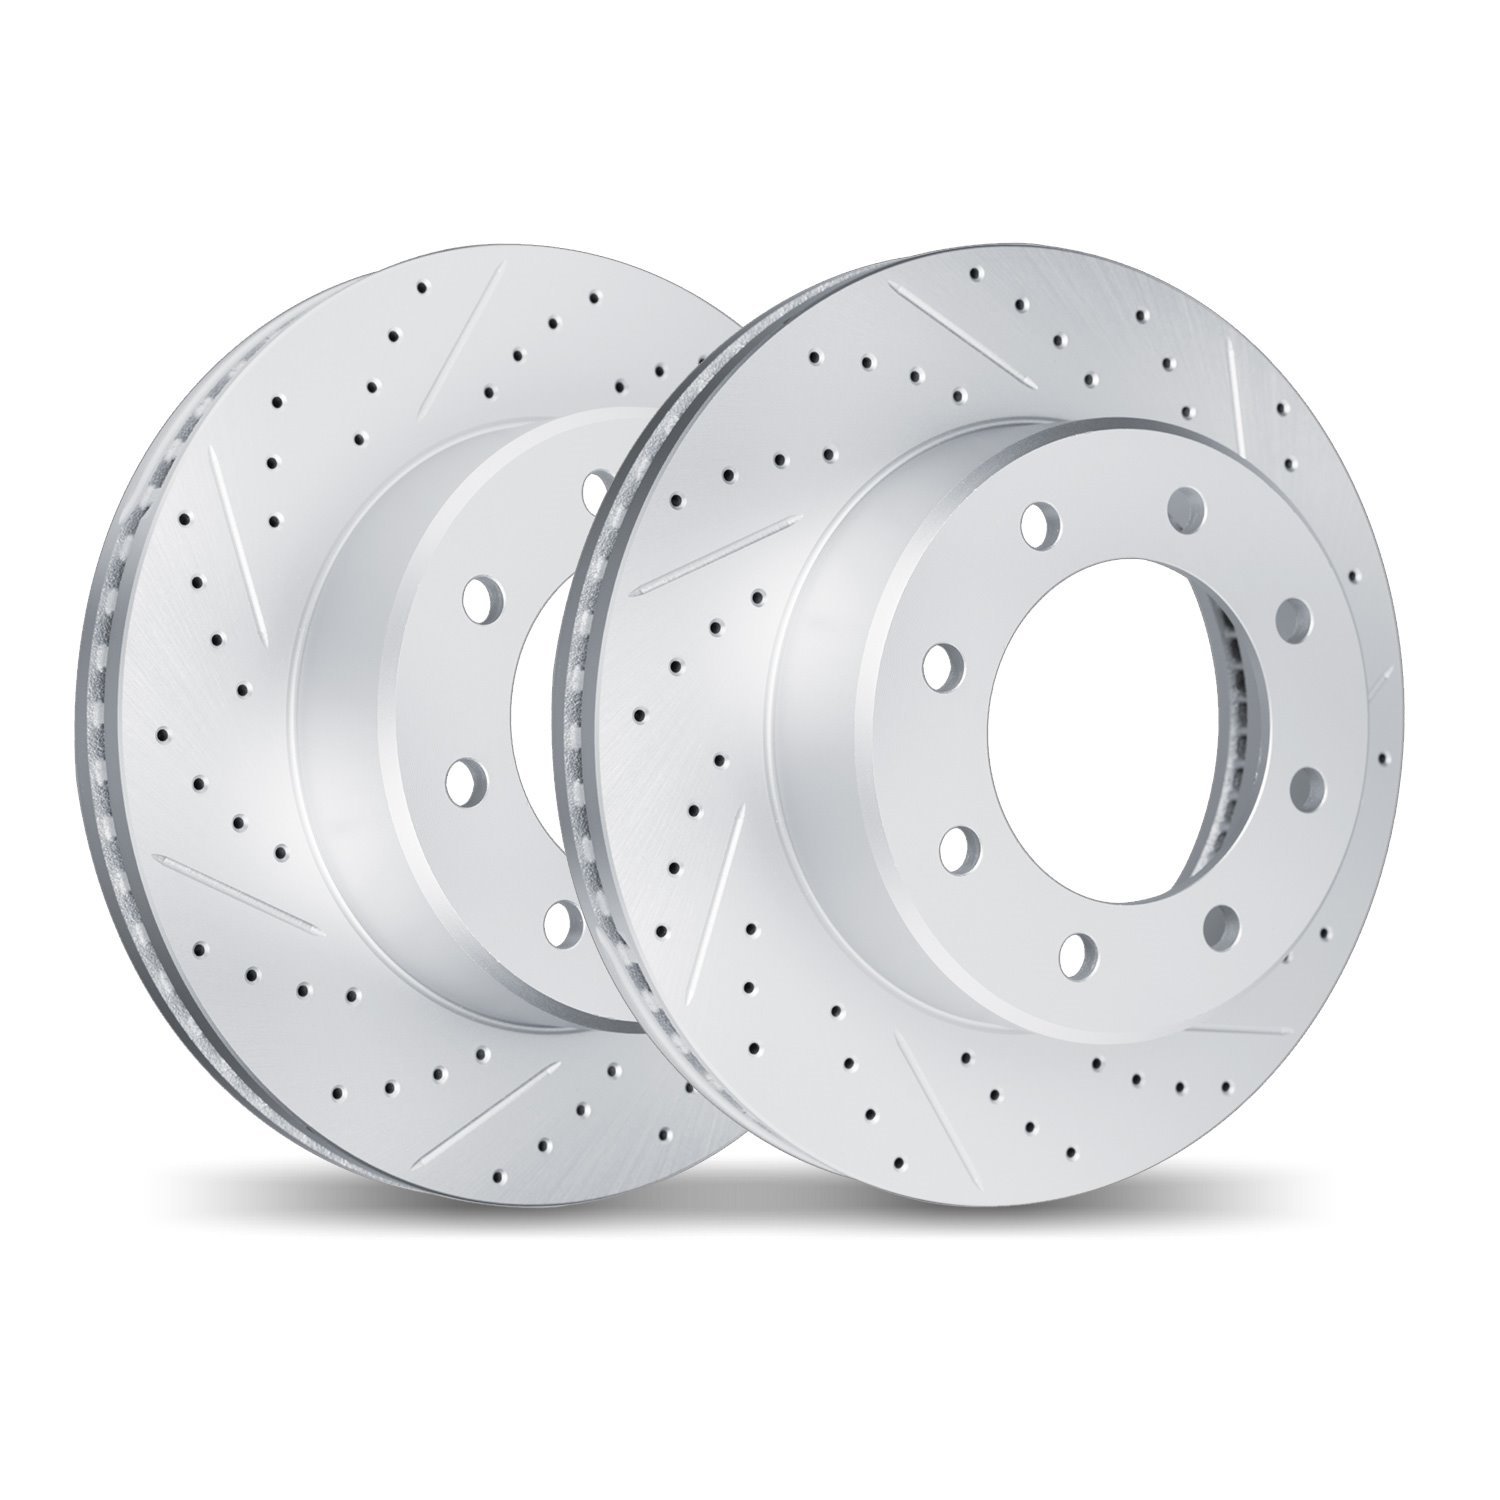 2002-54121 Geoperformance Drilled/Slotted Brake Rotors, Fits Select Ford/Lincoln/Mercury/Mazda, Position: Rear